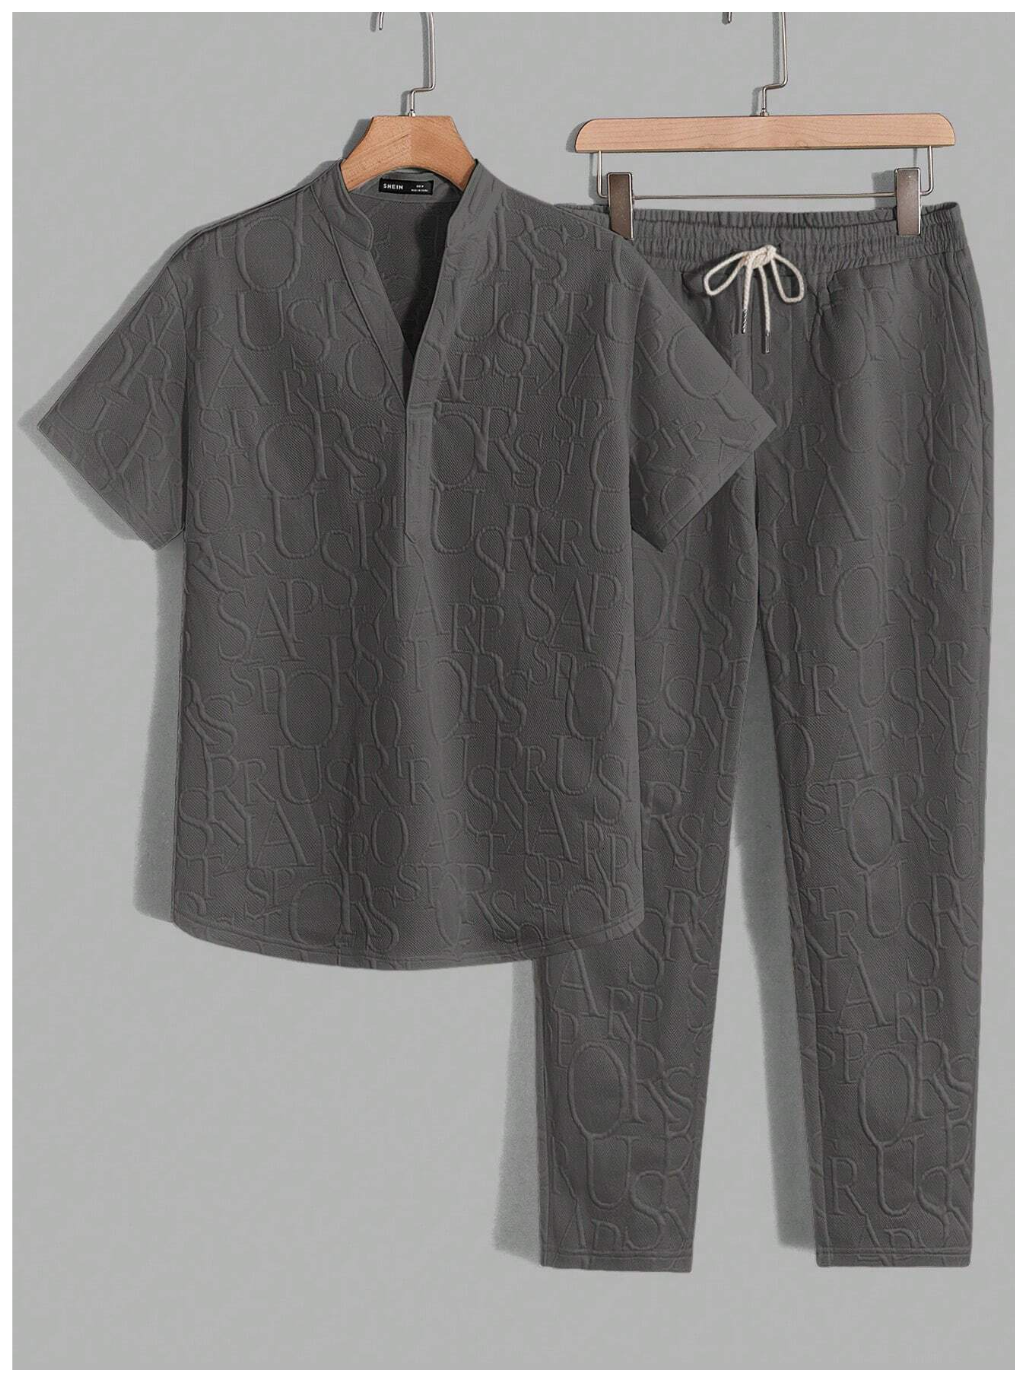 Lettered Luxe: Manfinity Homme's Casual 2-Piece Set for Effortless Style"